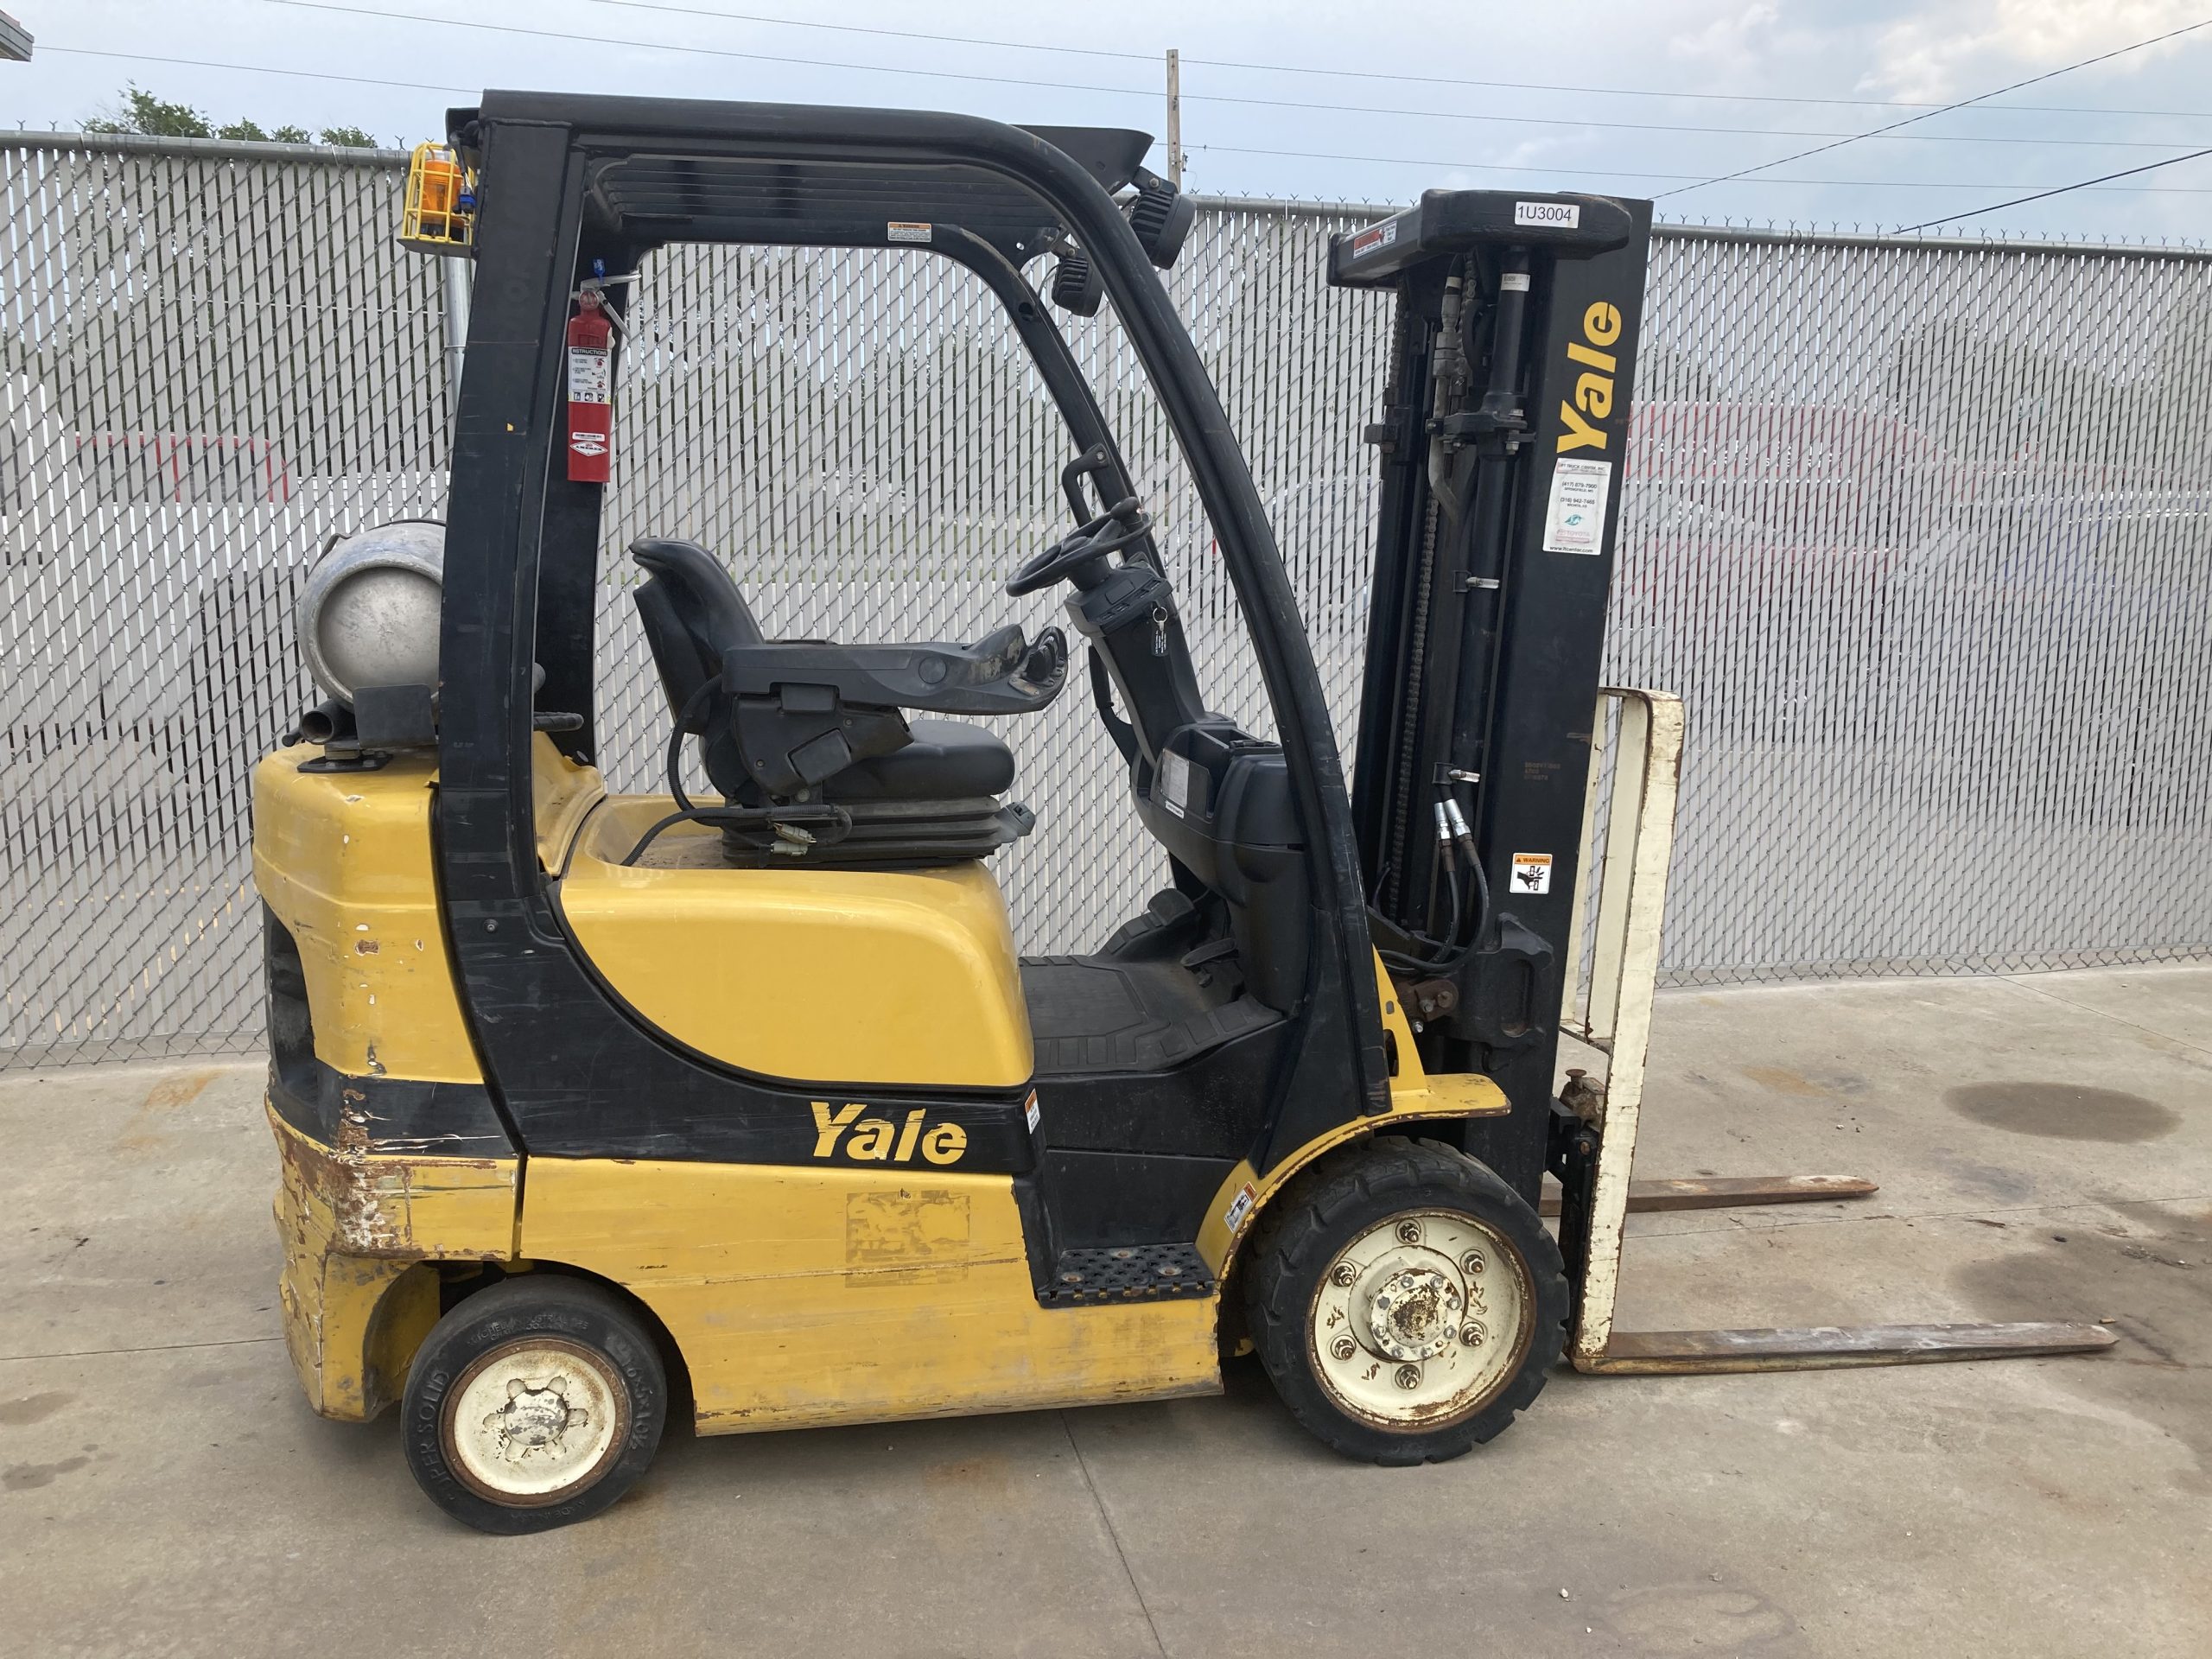 Featured image for “YALE 5,000 LBS CAPACITY CUSHION TIRED FORKLIFT”